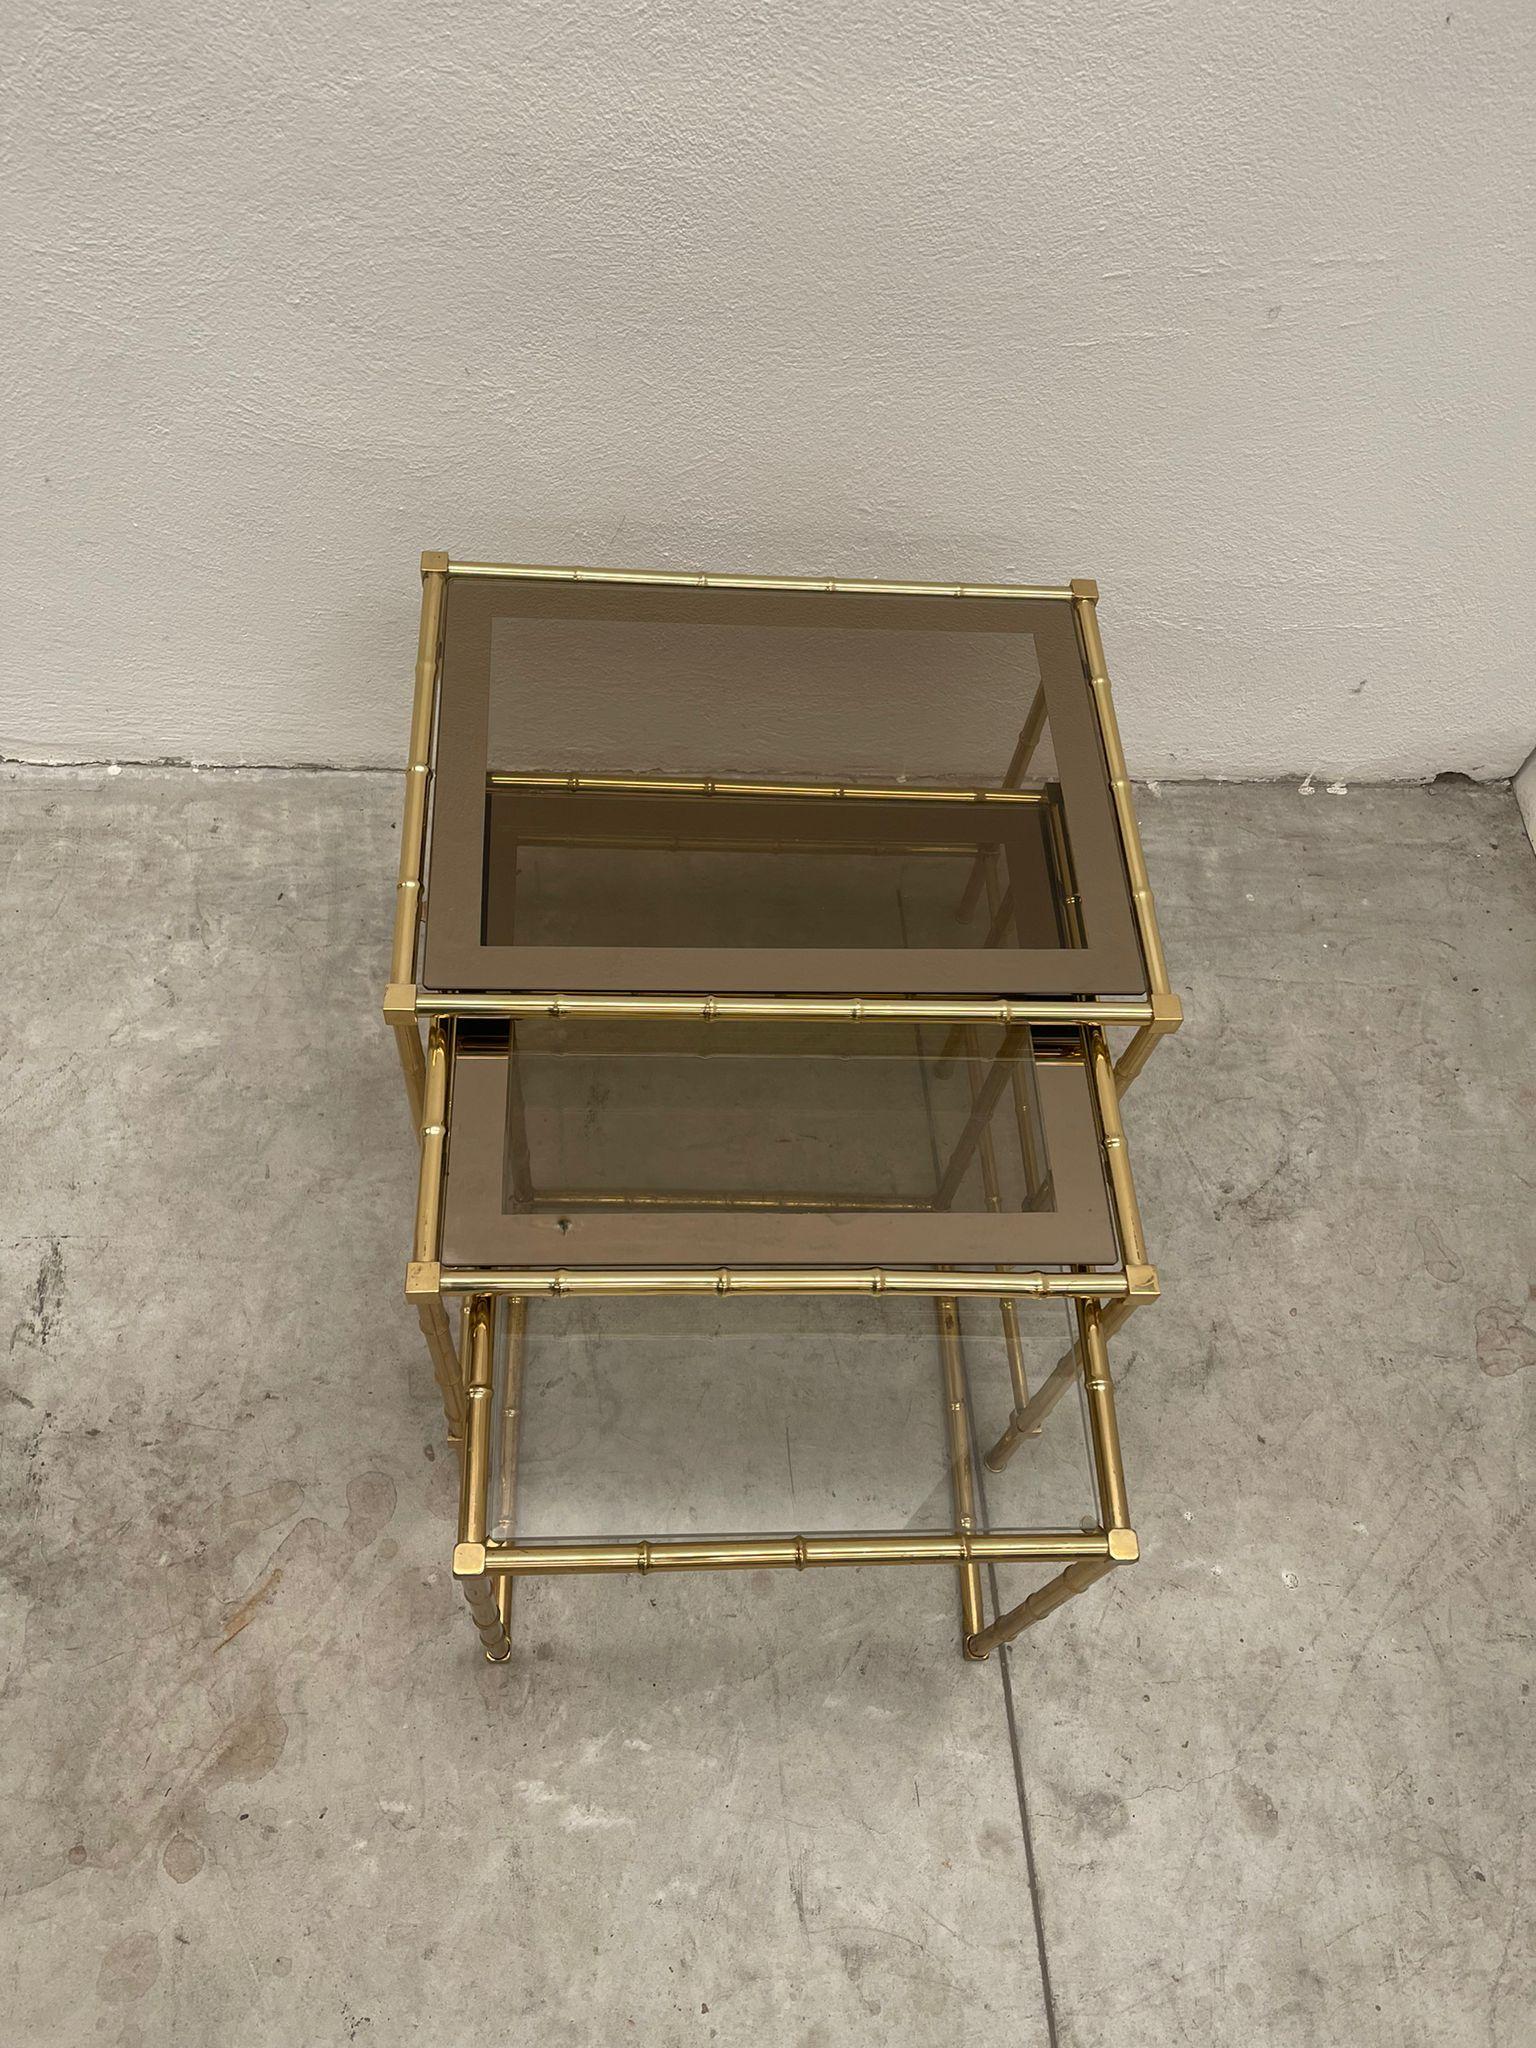 Trio of tables made in brass in Italy. In bambu design Due to the signs of aging which makes the piece unique, it was decided not to make any changes.

Made and Designed by Mice di Rugiano.